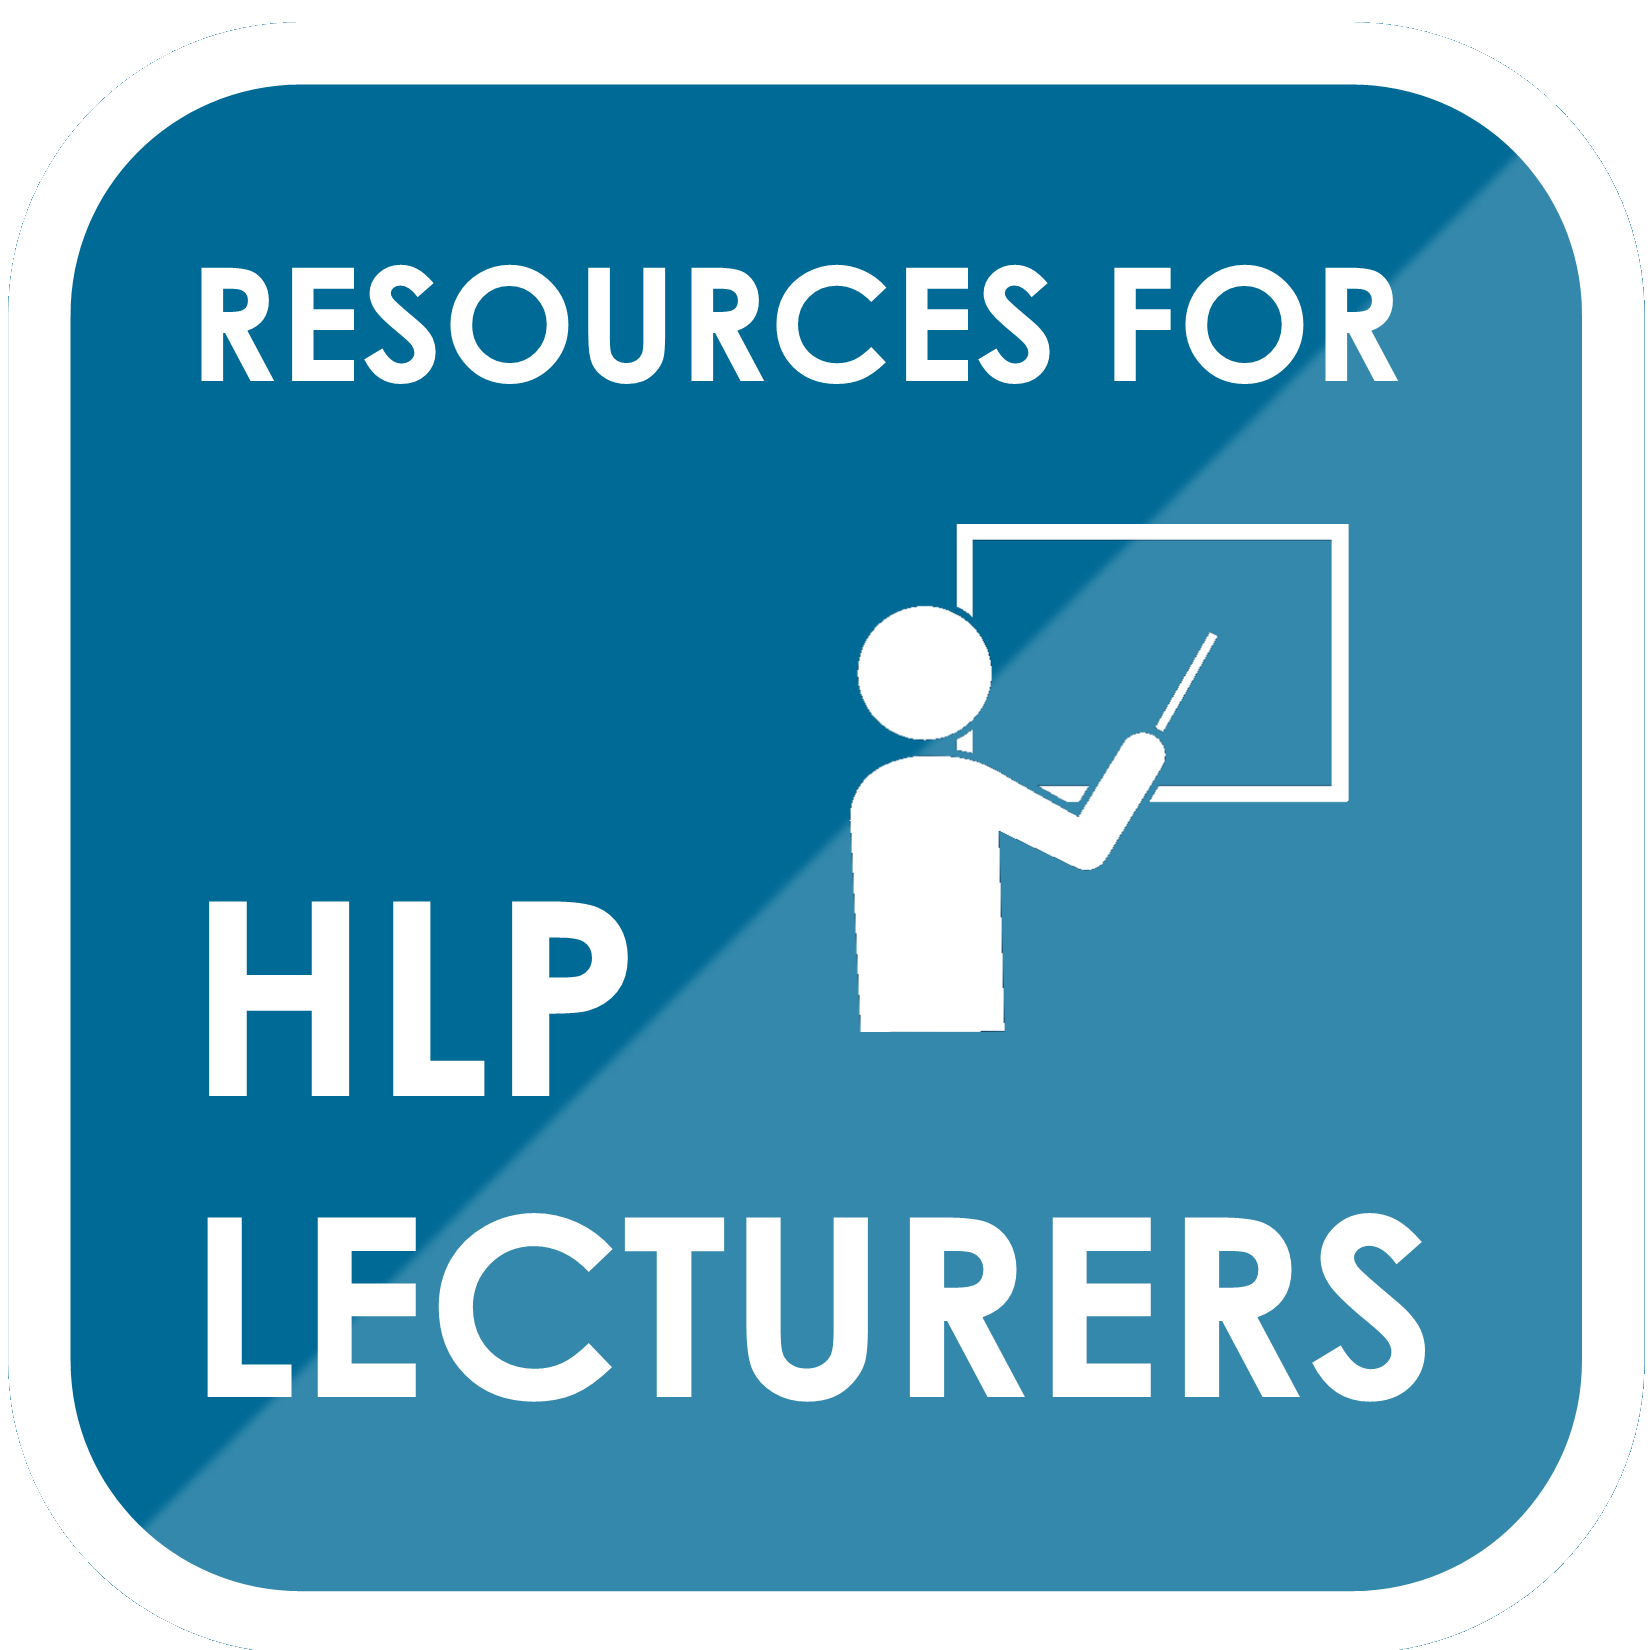 Resources for HLP Lecturers